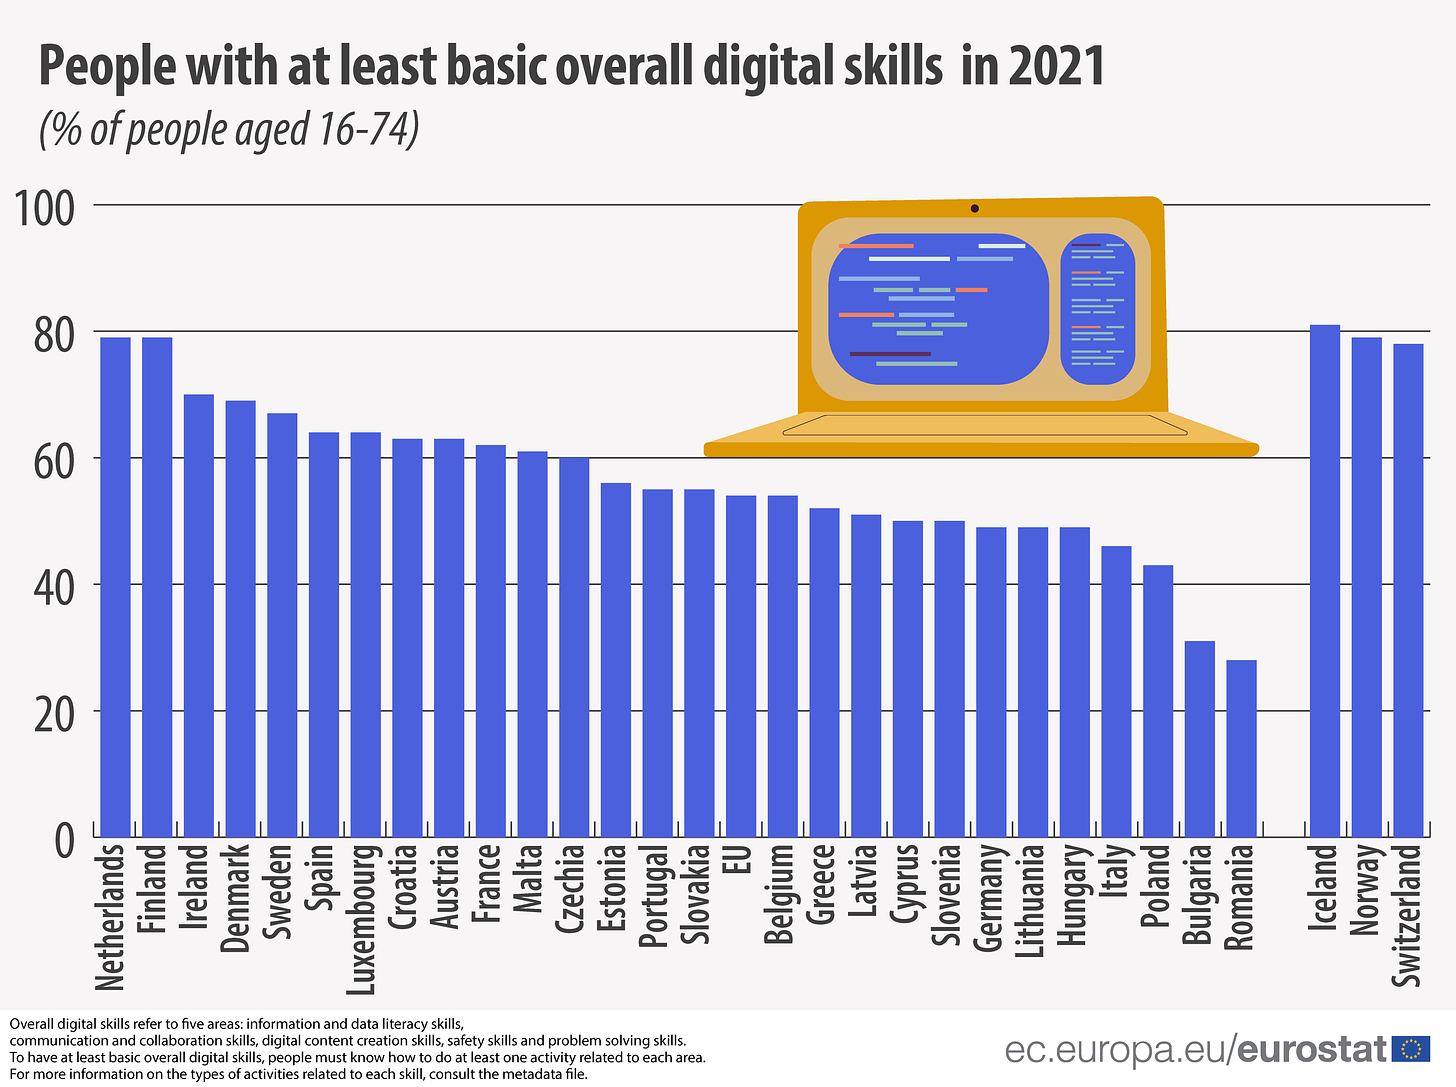 Bar graph: People with at least basic overall digital skills in 2021, percent of people aged 16-74 in the EU and EFTA countries